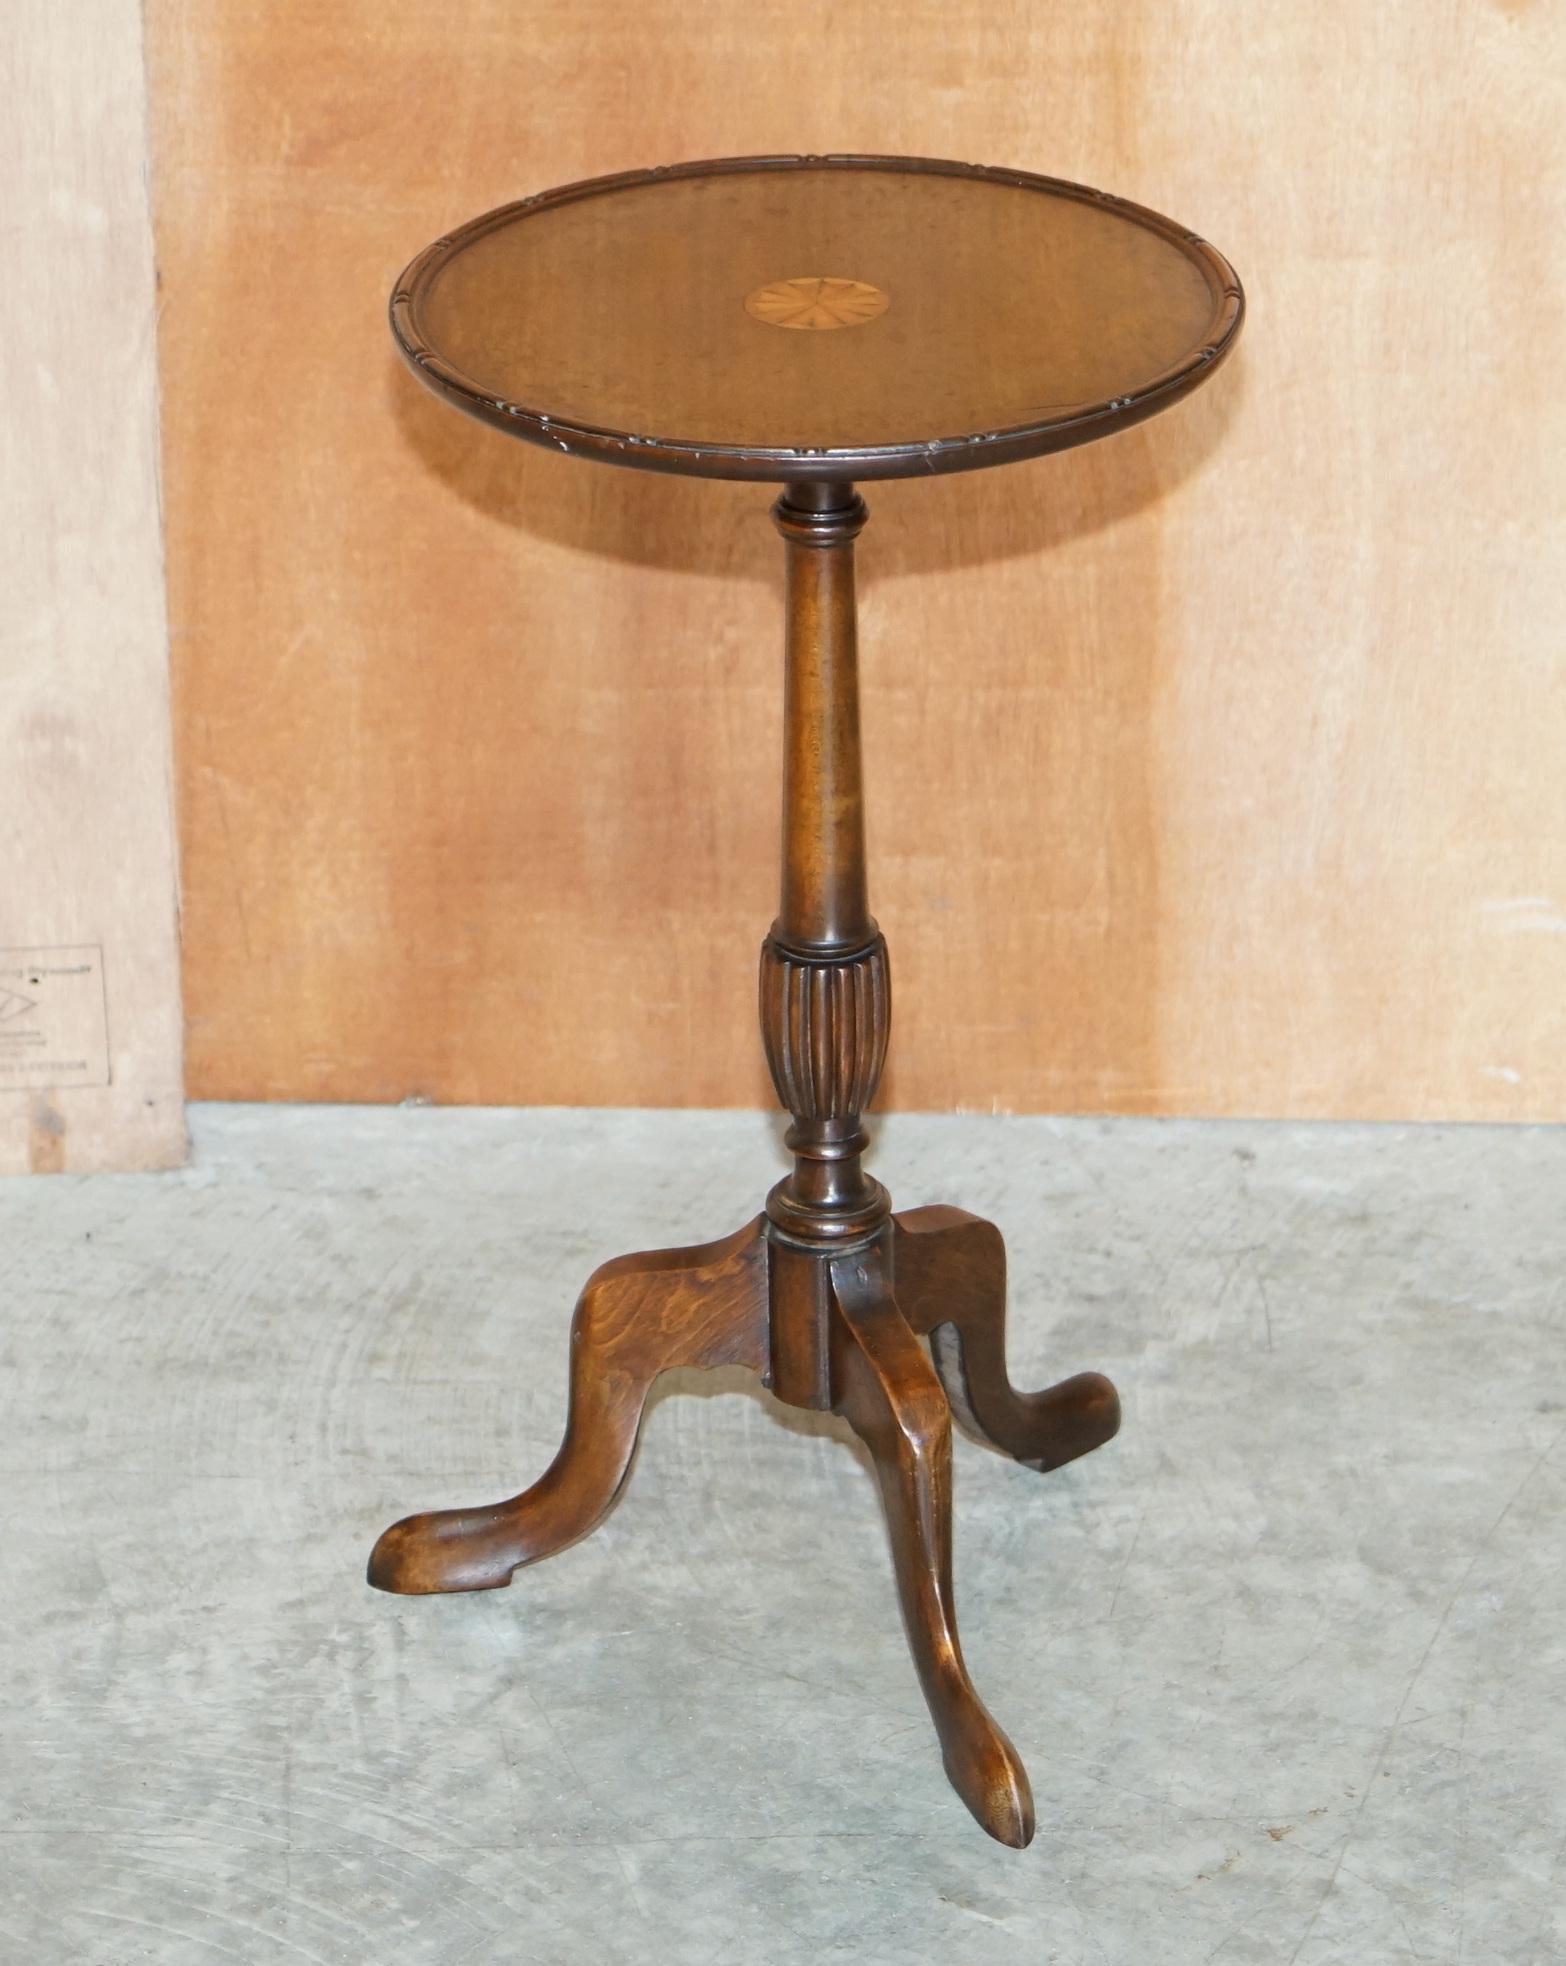 We are delighted to offer this lovely late Victorian Sheraton Revival tripod table 

A very good looking well made and decorative piece, it sits well in any setting and is very unitarian. The piece has the Sheraton revival inlay to the top, its